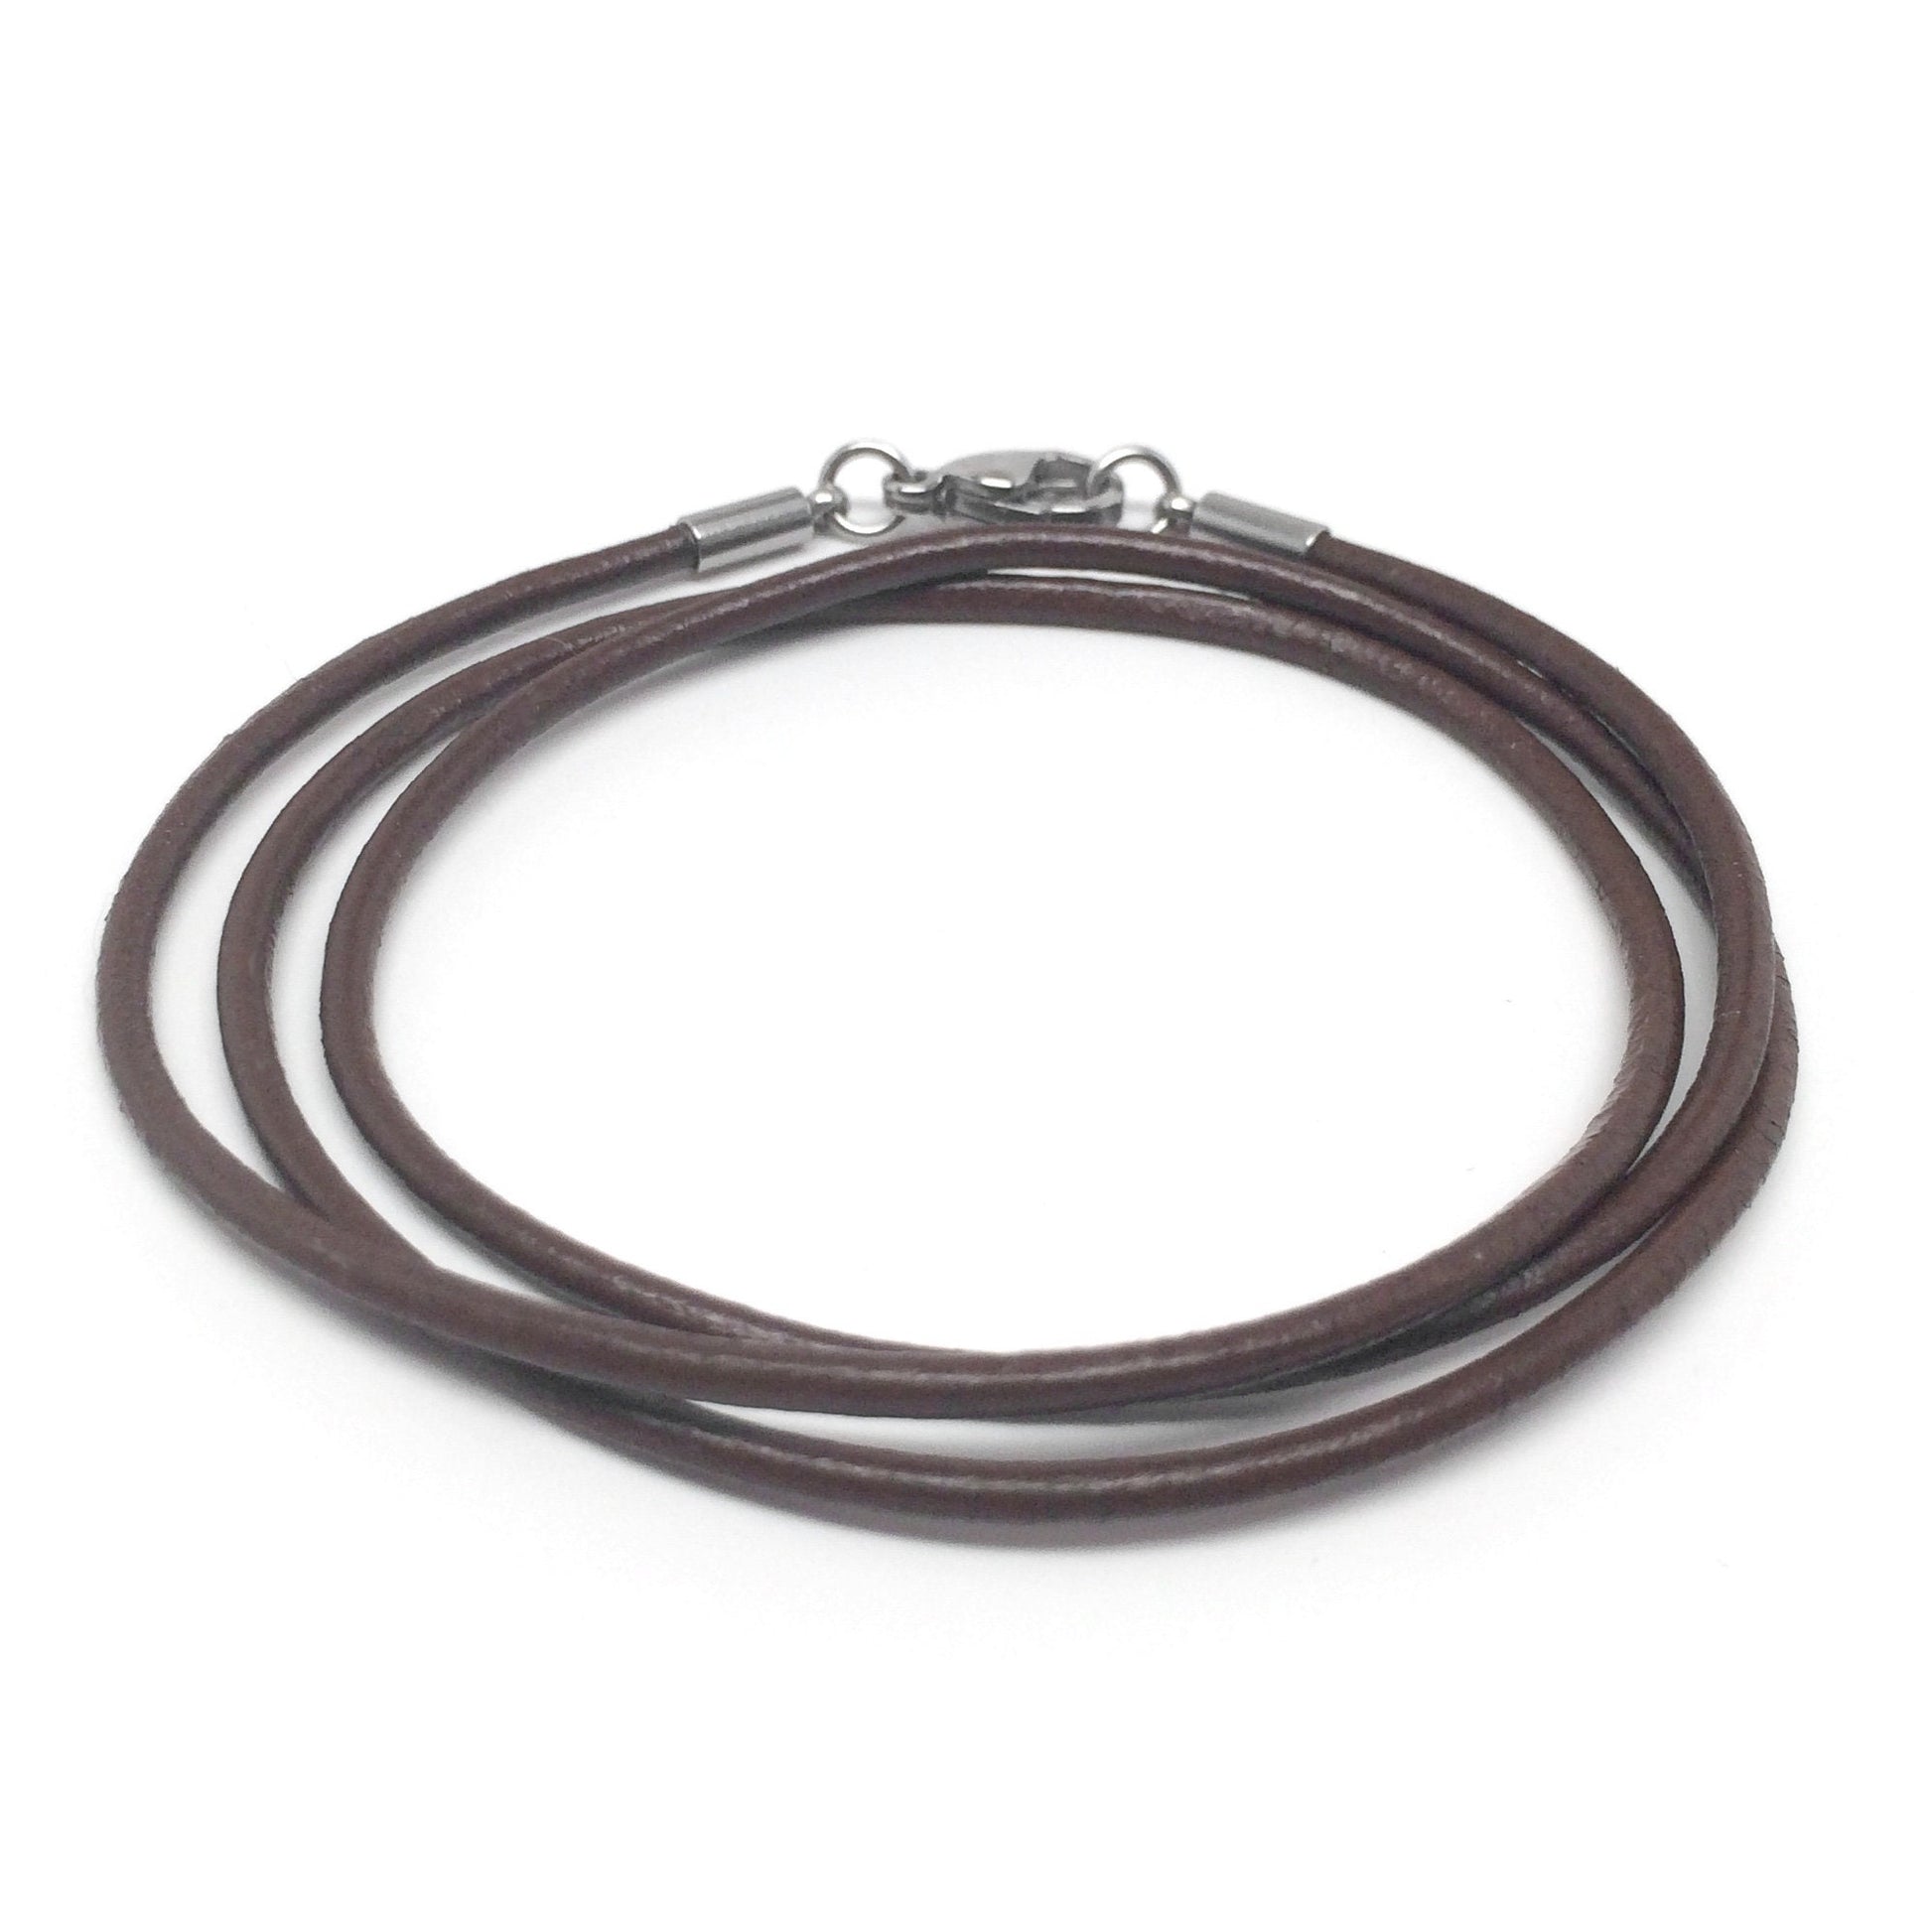 2mm Genuine Black Leather Necklace Cord with Stainless Steel